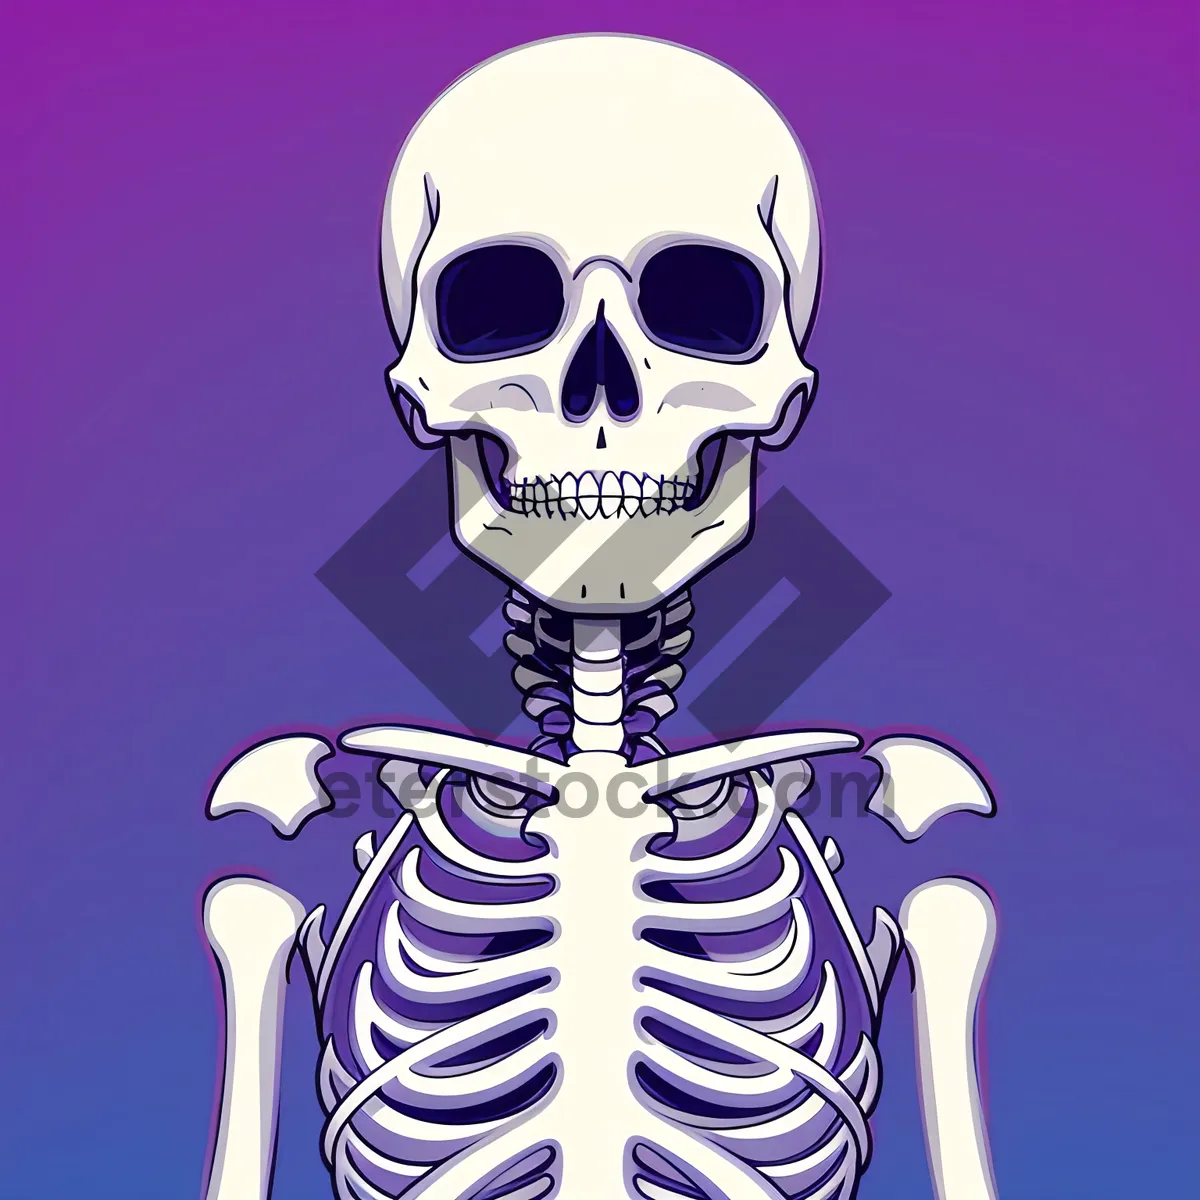 Picture of Sinister Skeleton: A Spooky, Cartoonish Tribute to Bone Anatomy